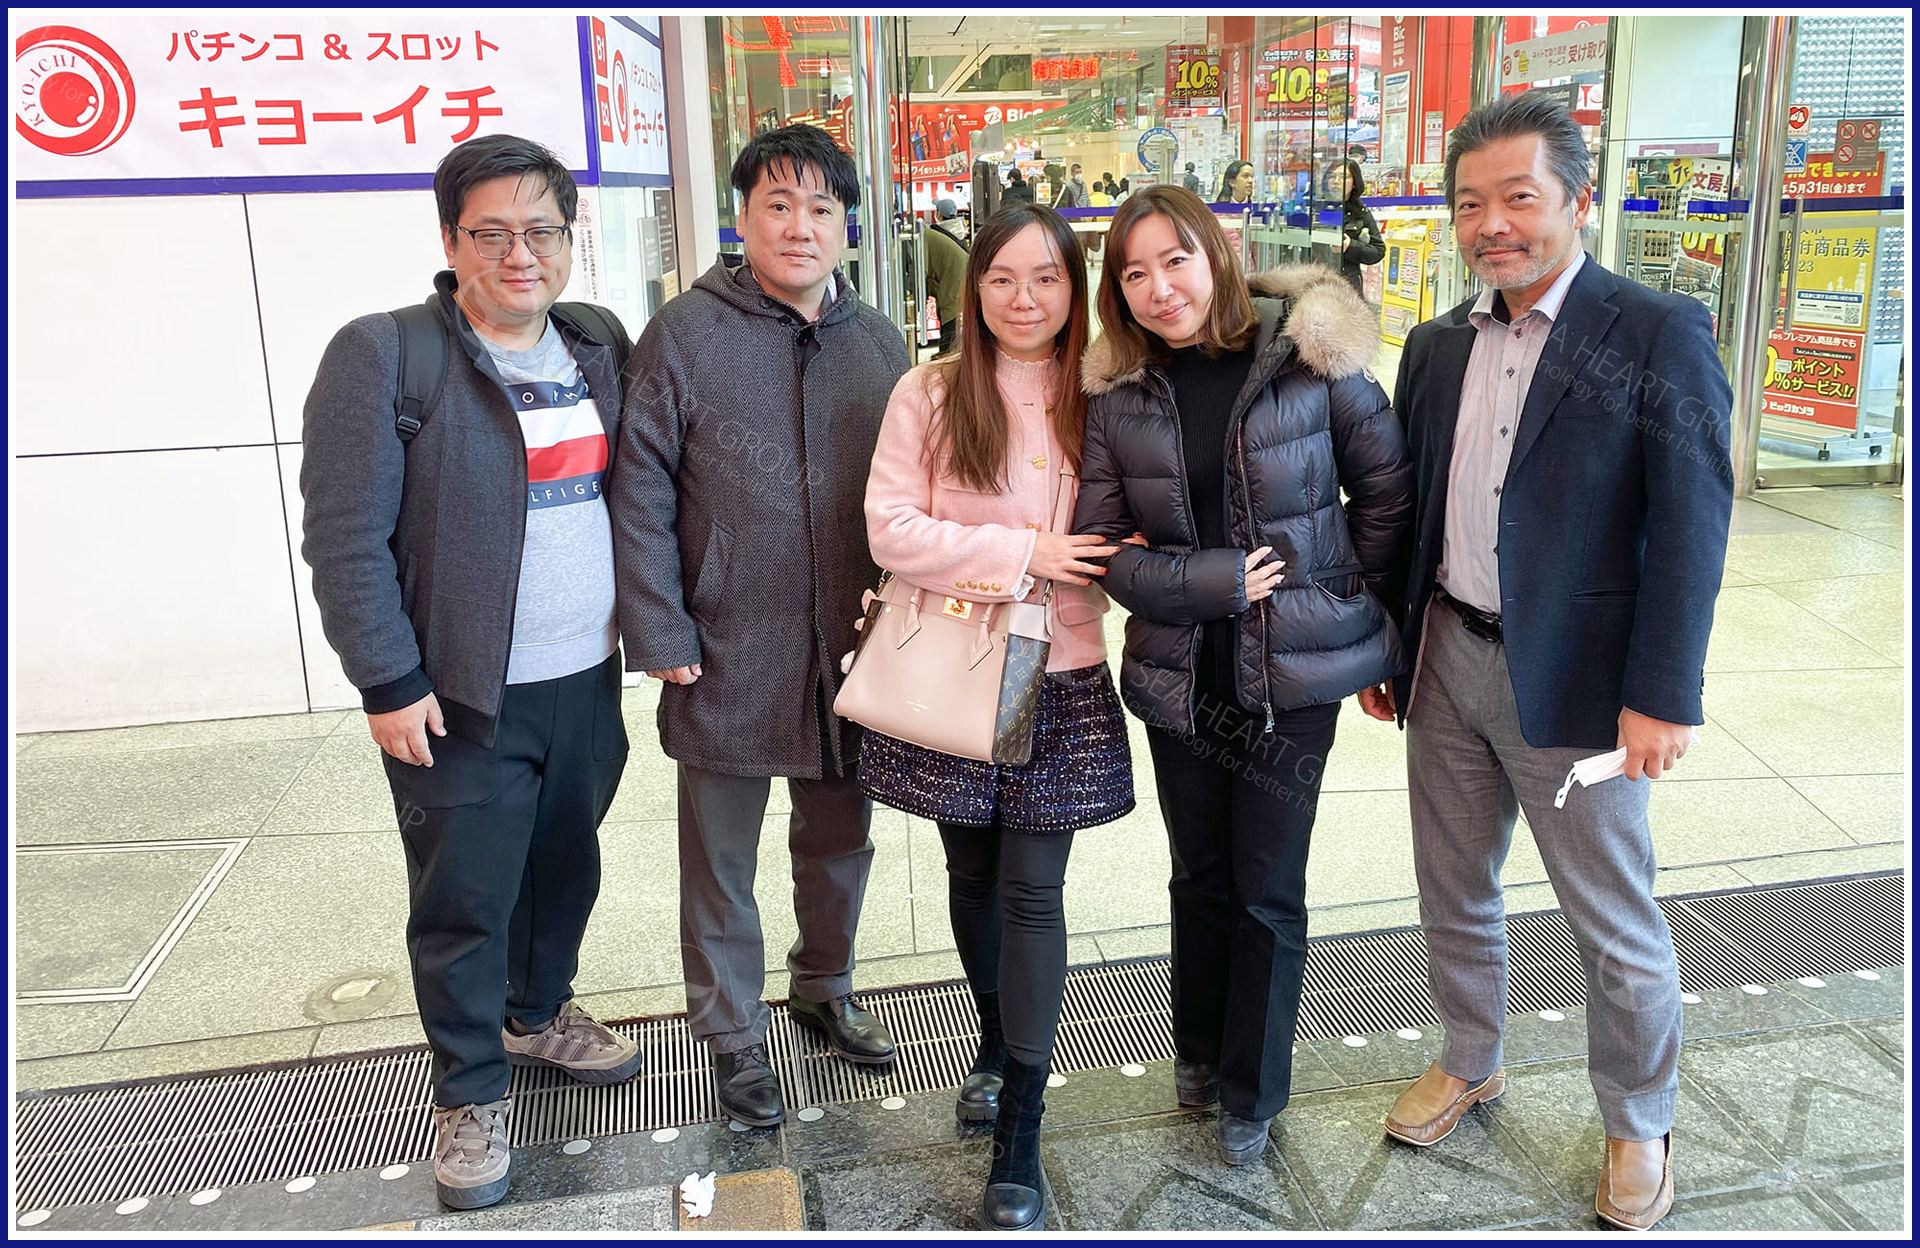 Sculpting Global Beauty: A CEO's Journey – Kira's Transformative Visit to a Client in Japan